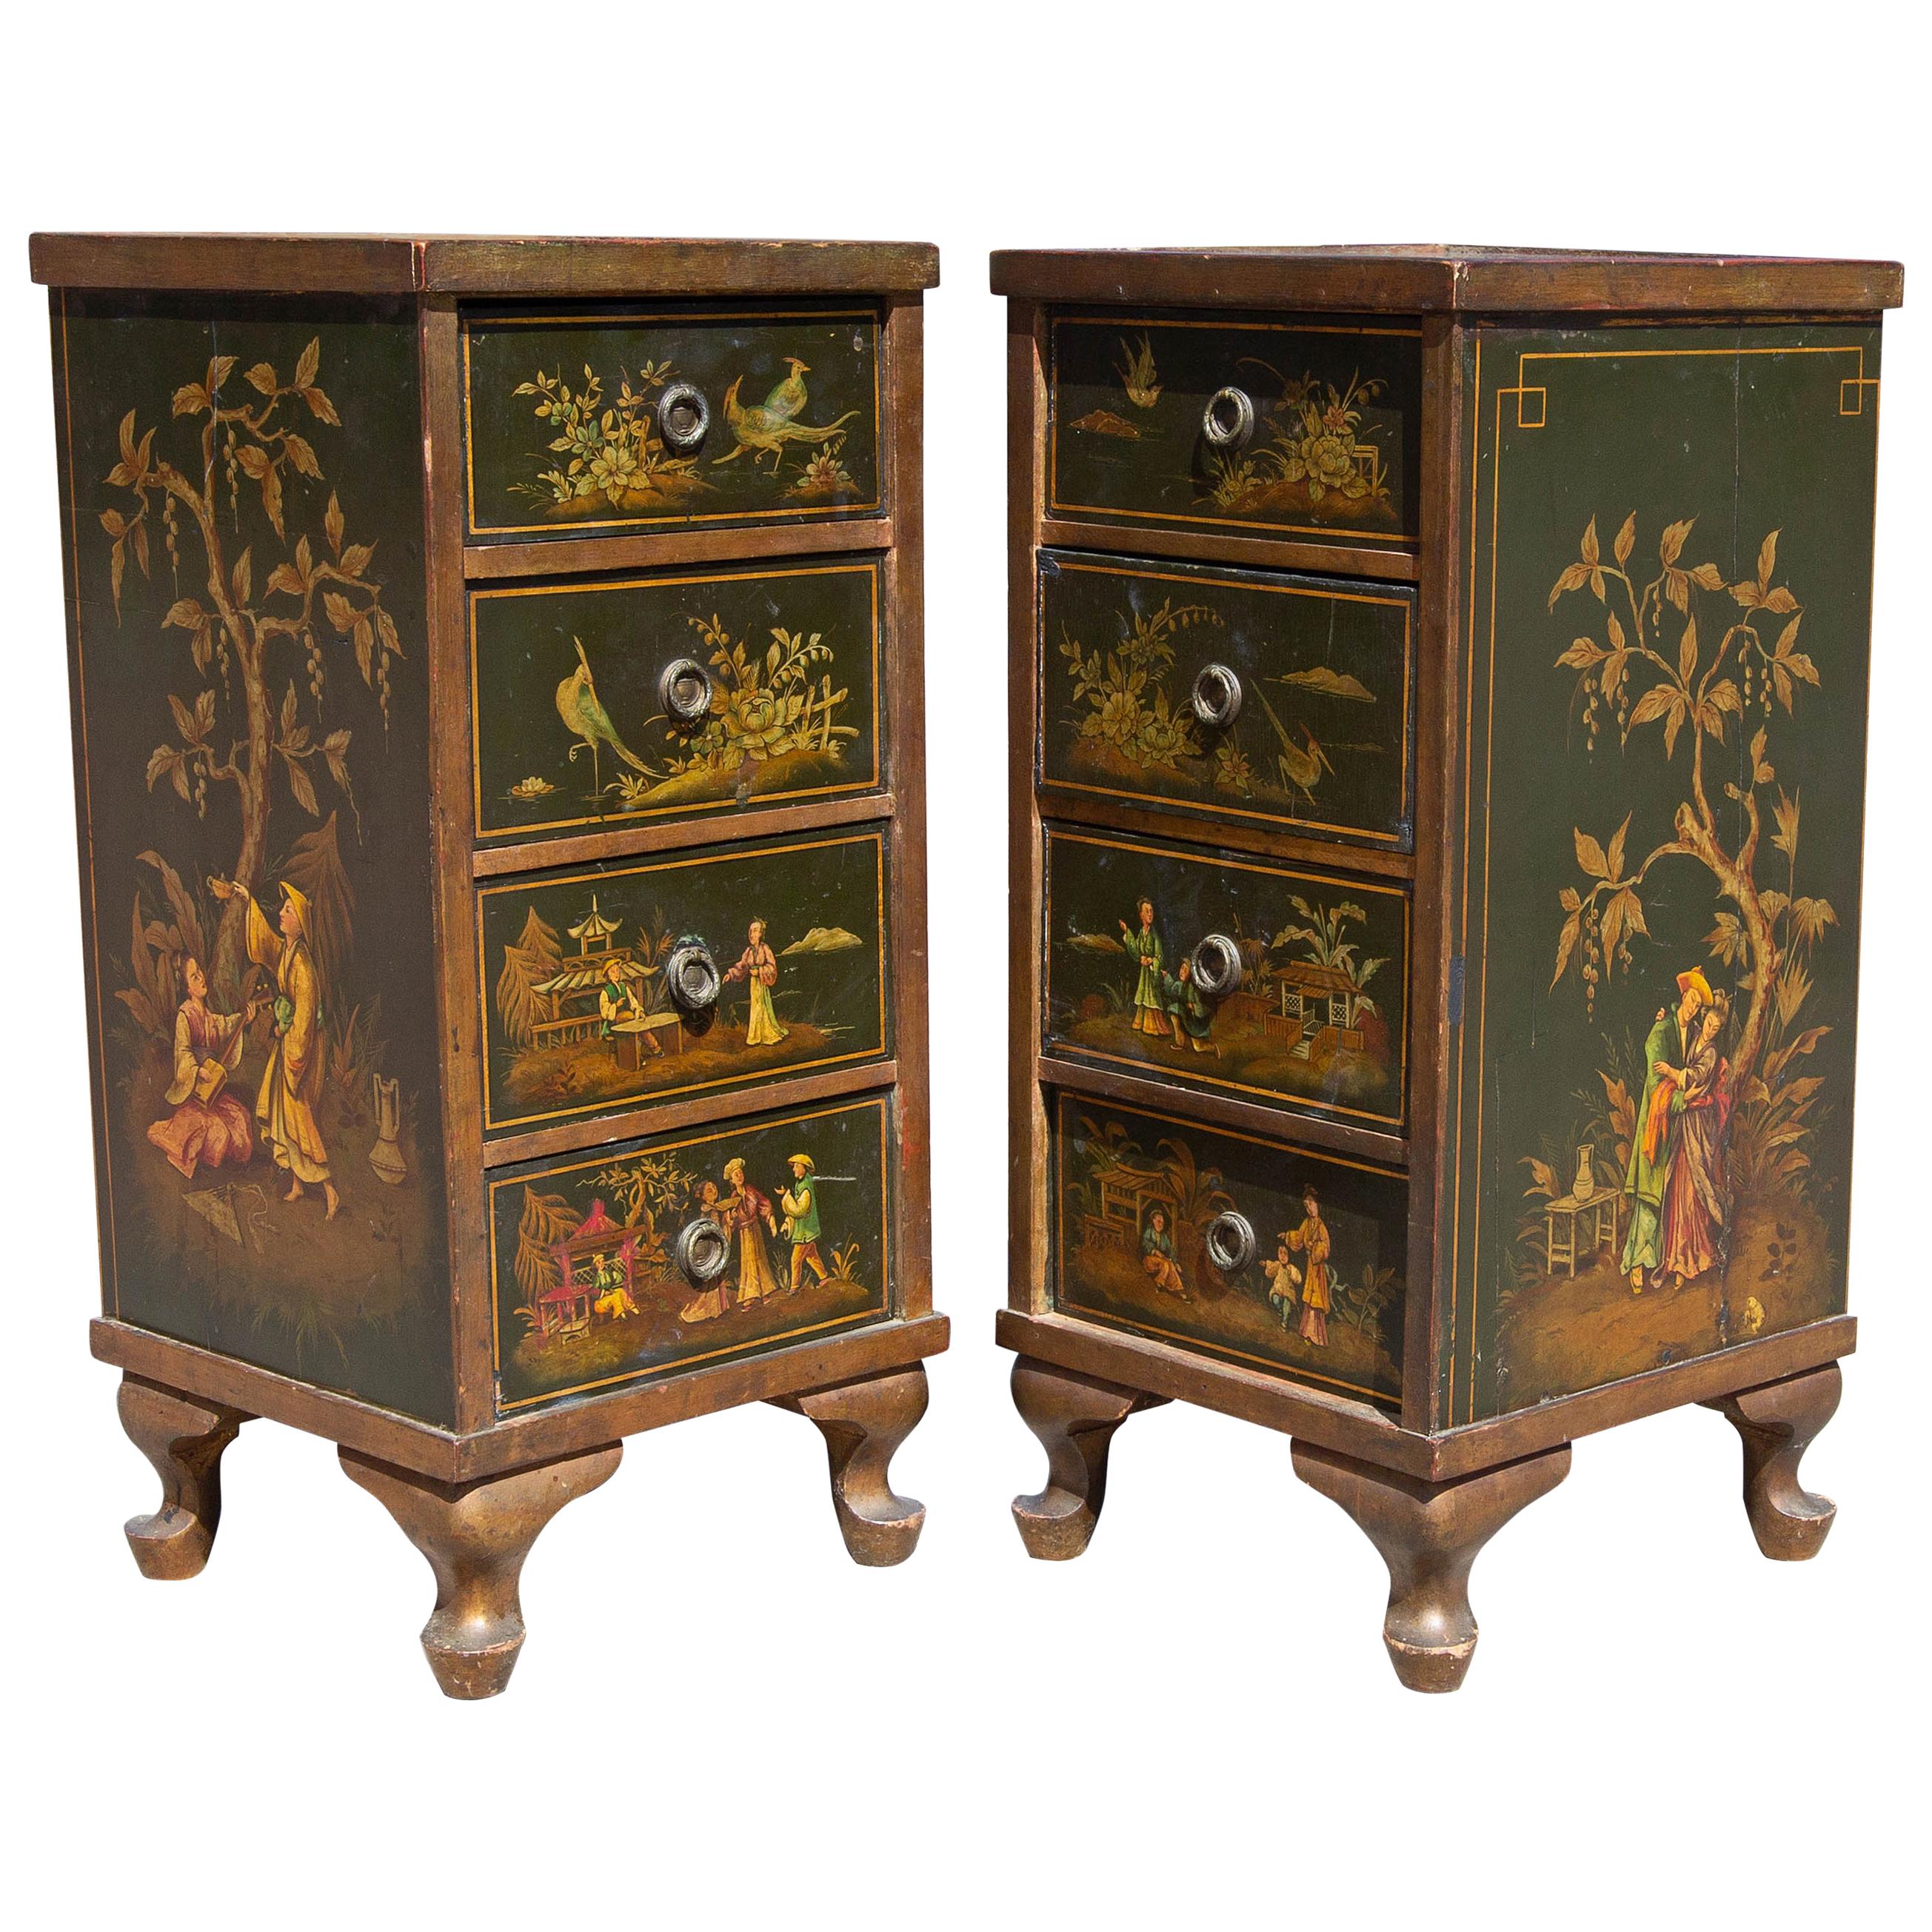 Antique Chinoiserie Side Cabinet Tables, a Pair